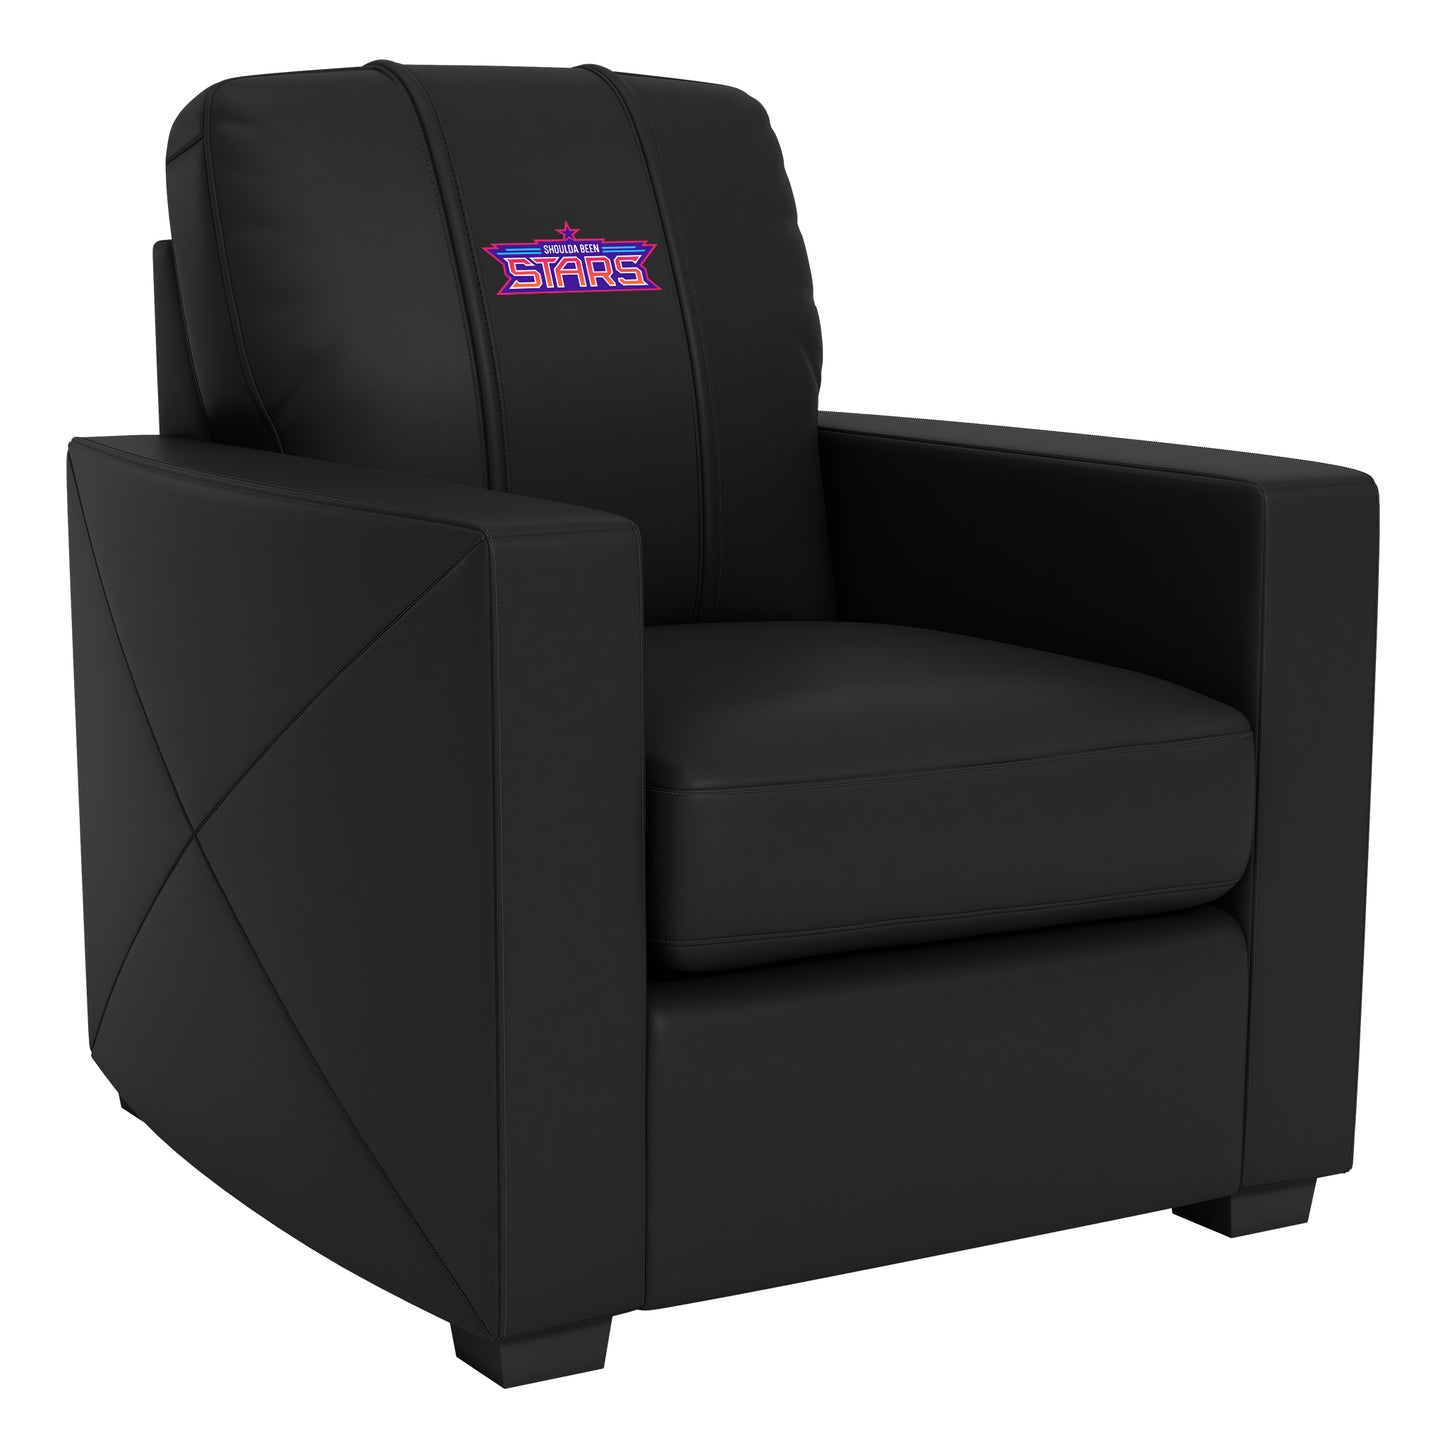 Silver Club Chair with Shoulda Been Stars Wordmark Logo